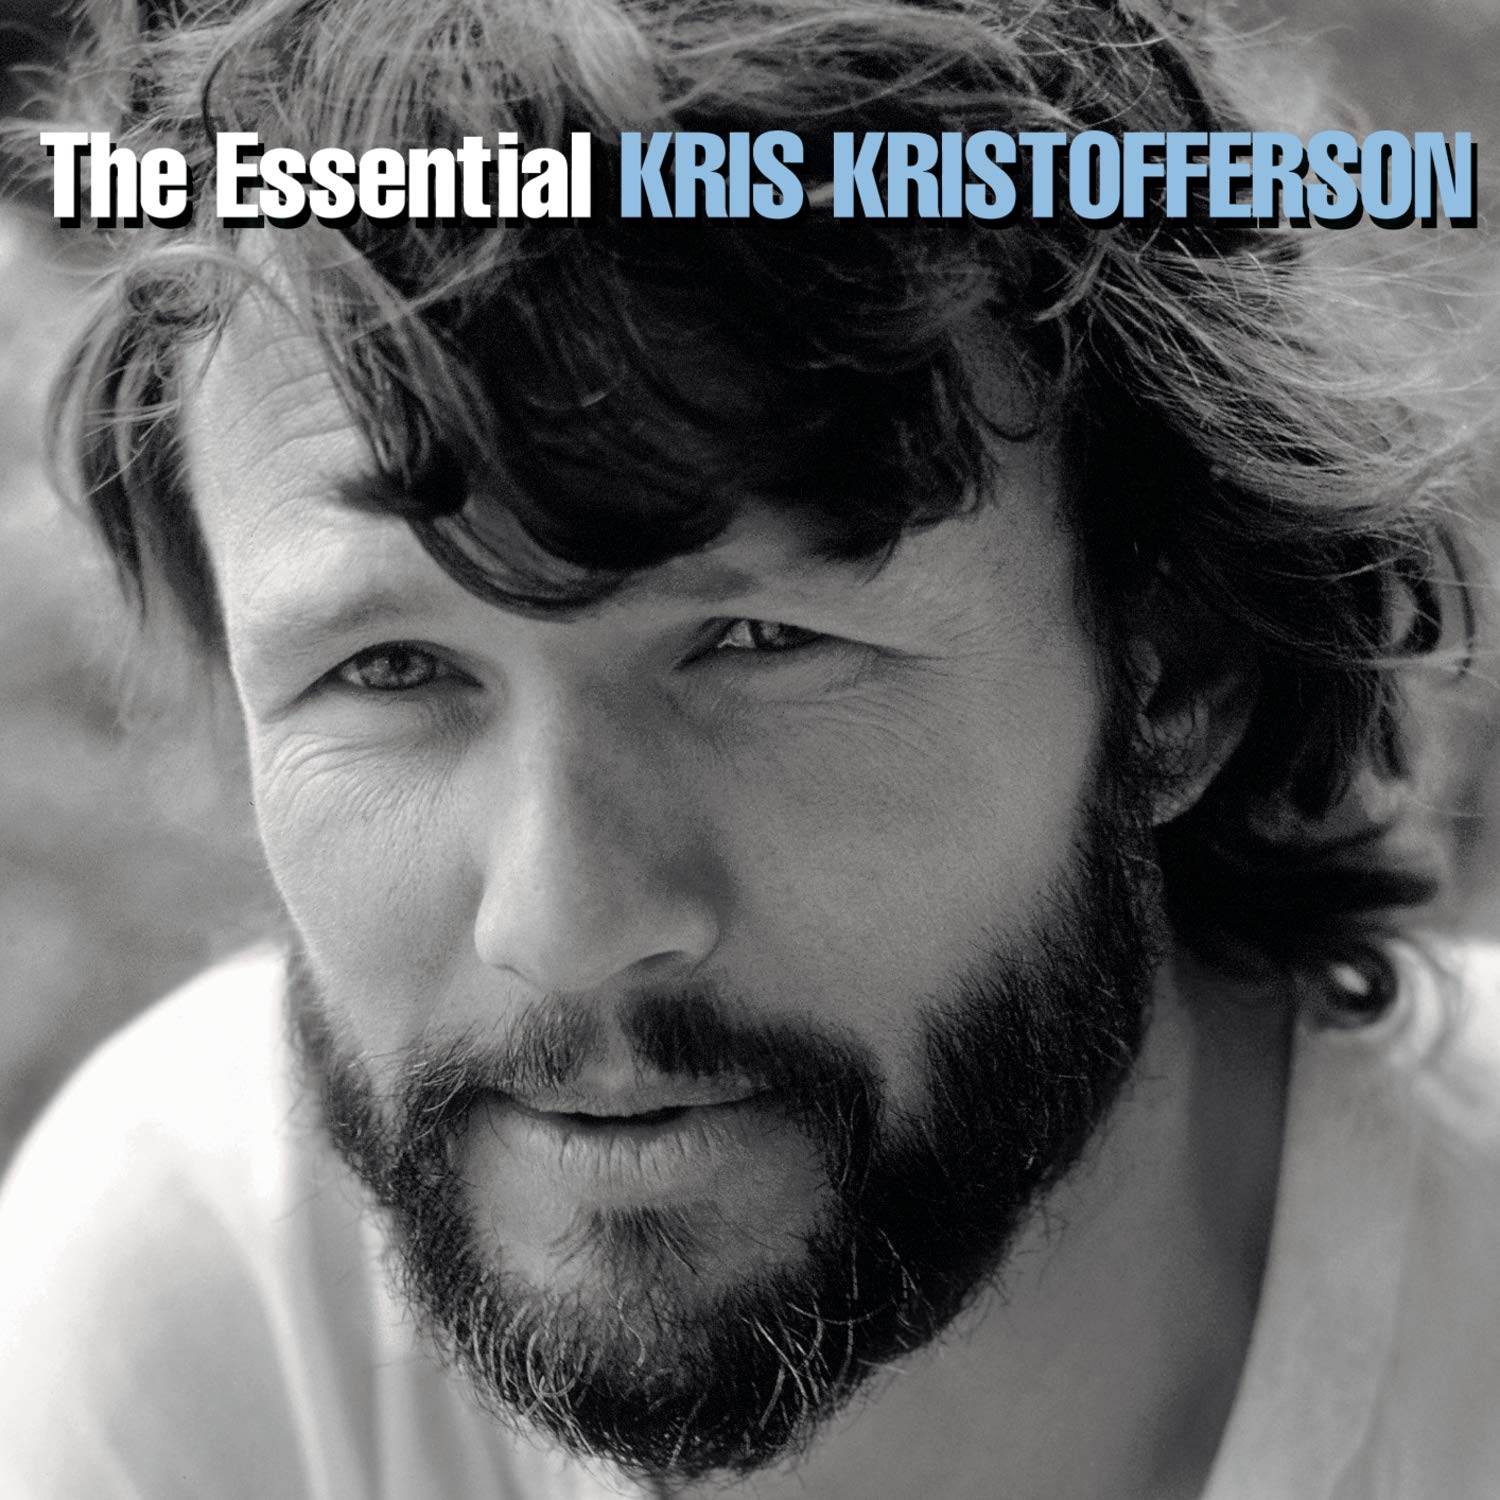 Living Boldly: The Life and Legacy of Kris Kristofferson